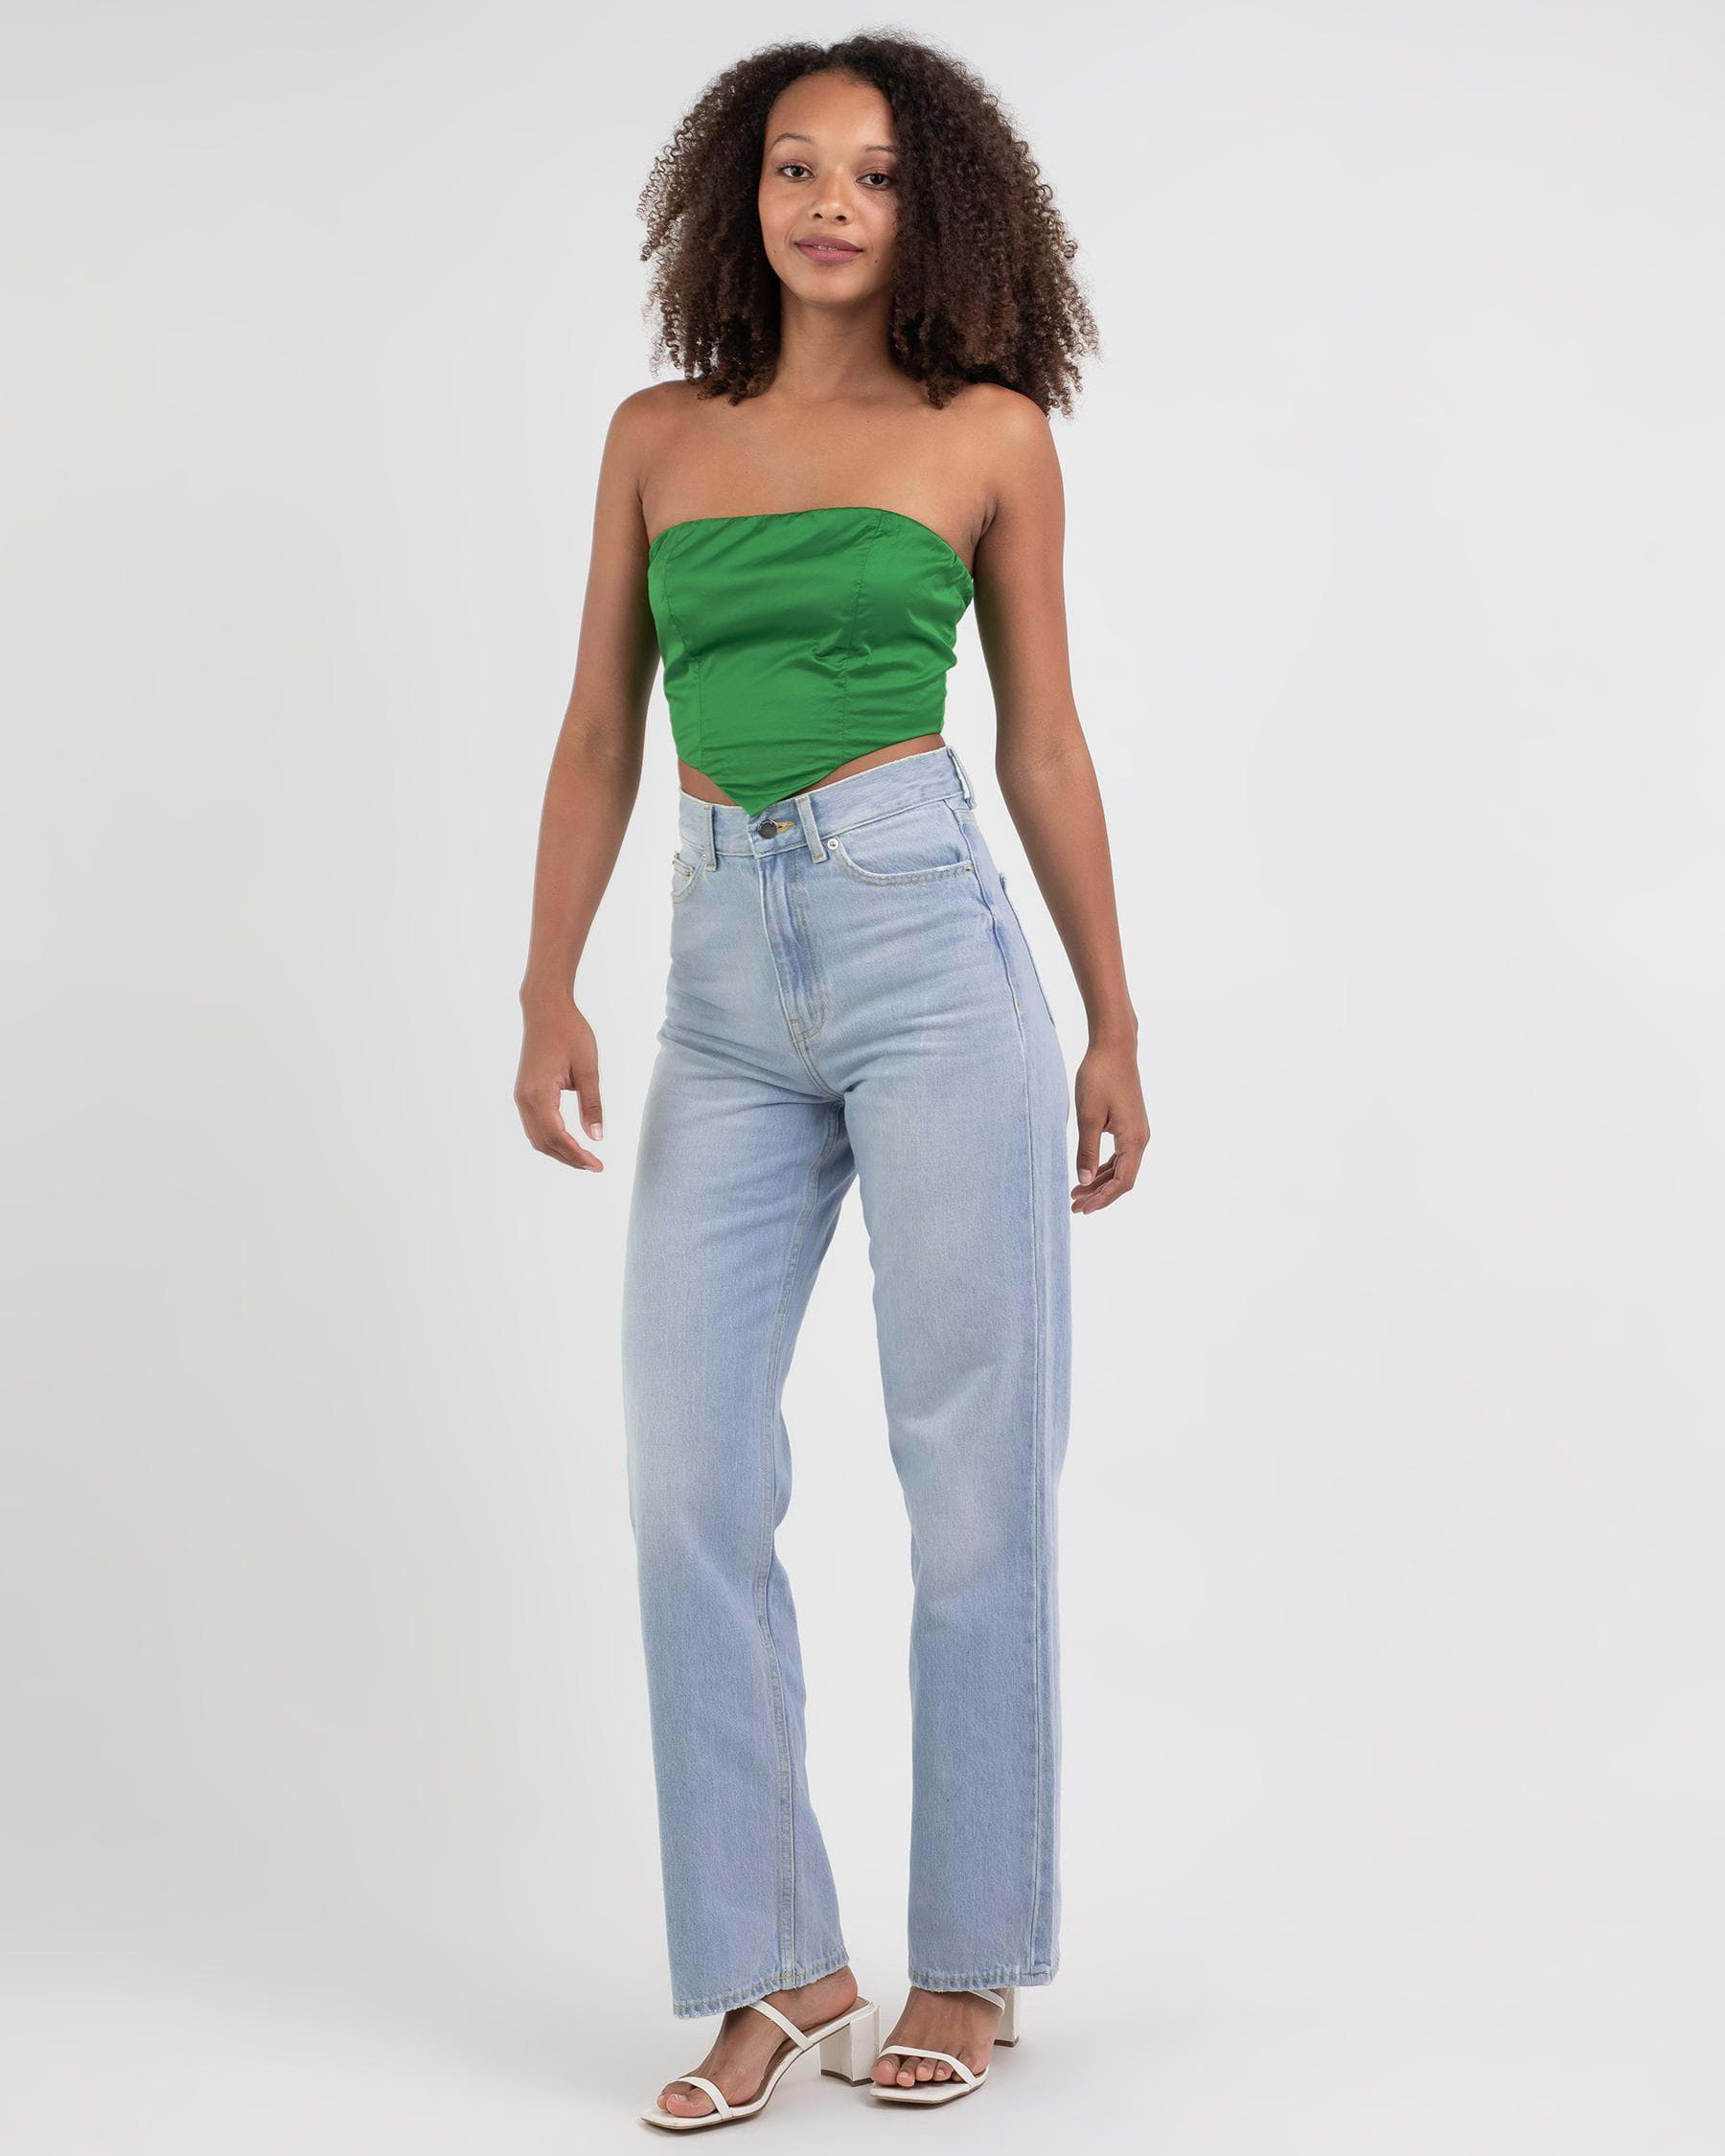 Luvalot Jenna Tube Top In Green - Fast Shipping & Easy Returns - City ...